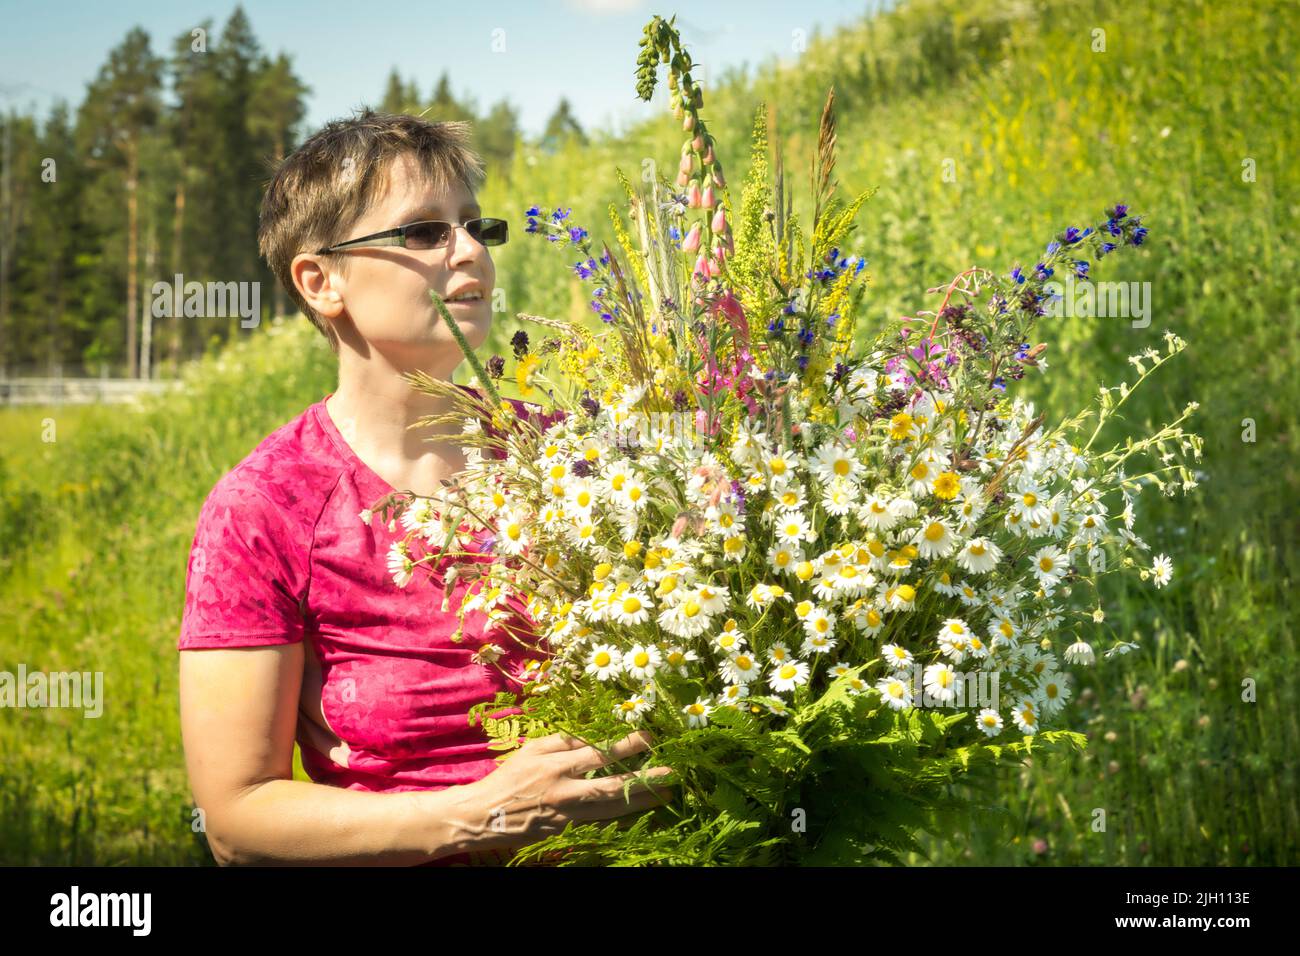 portrait of a florist woman with bouquet of wild flowers Stock Photo